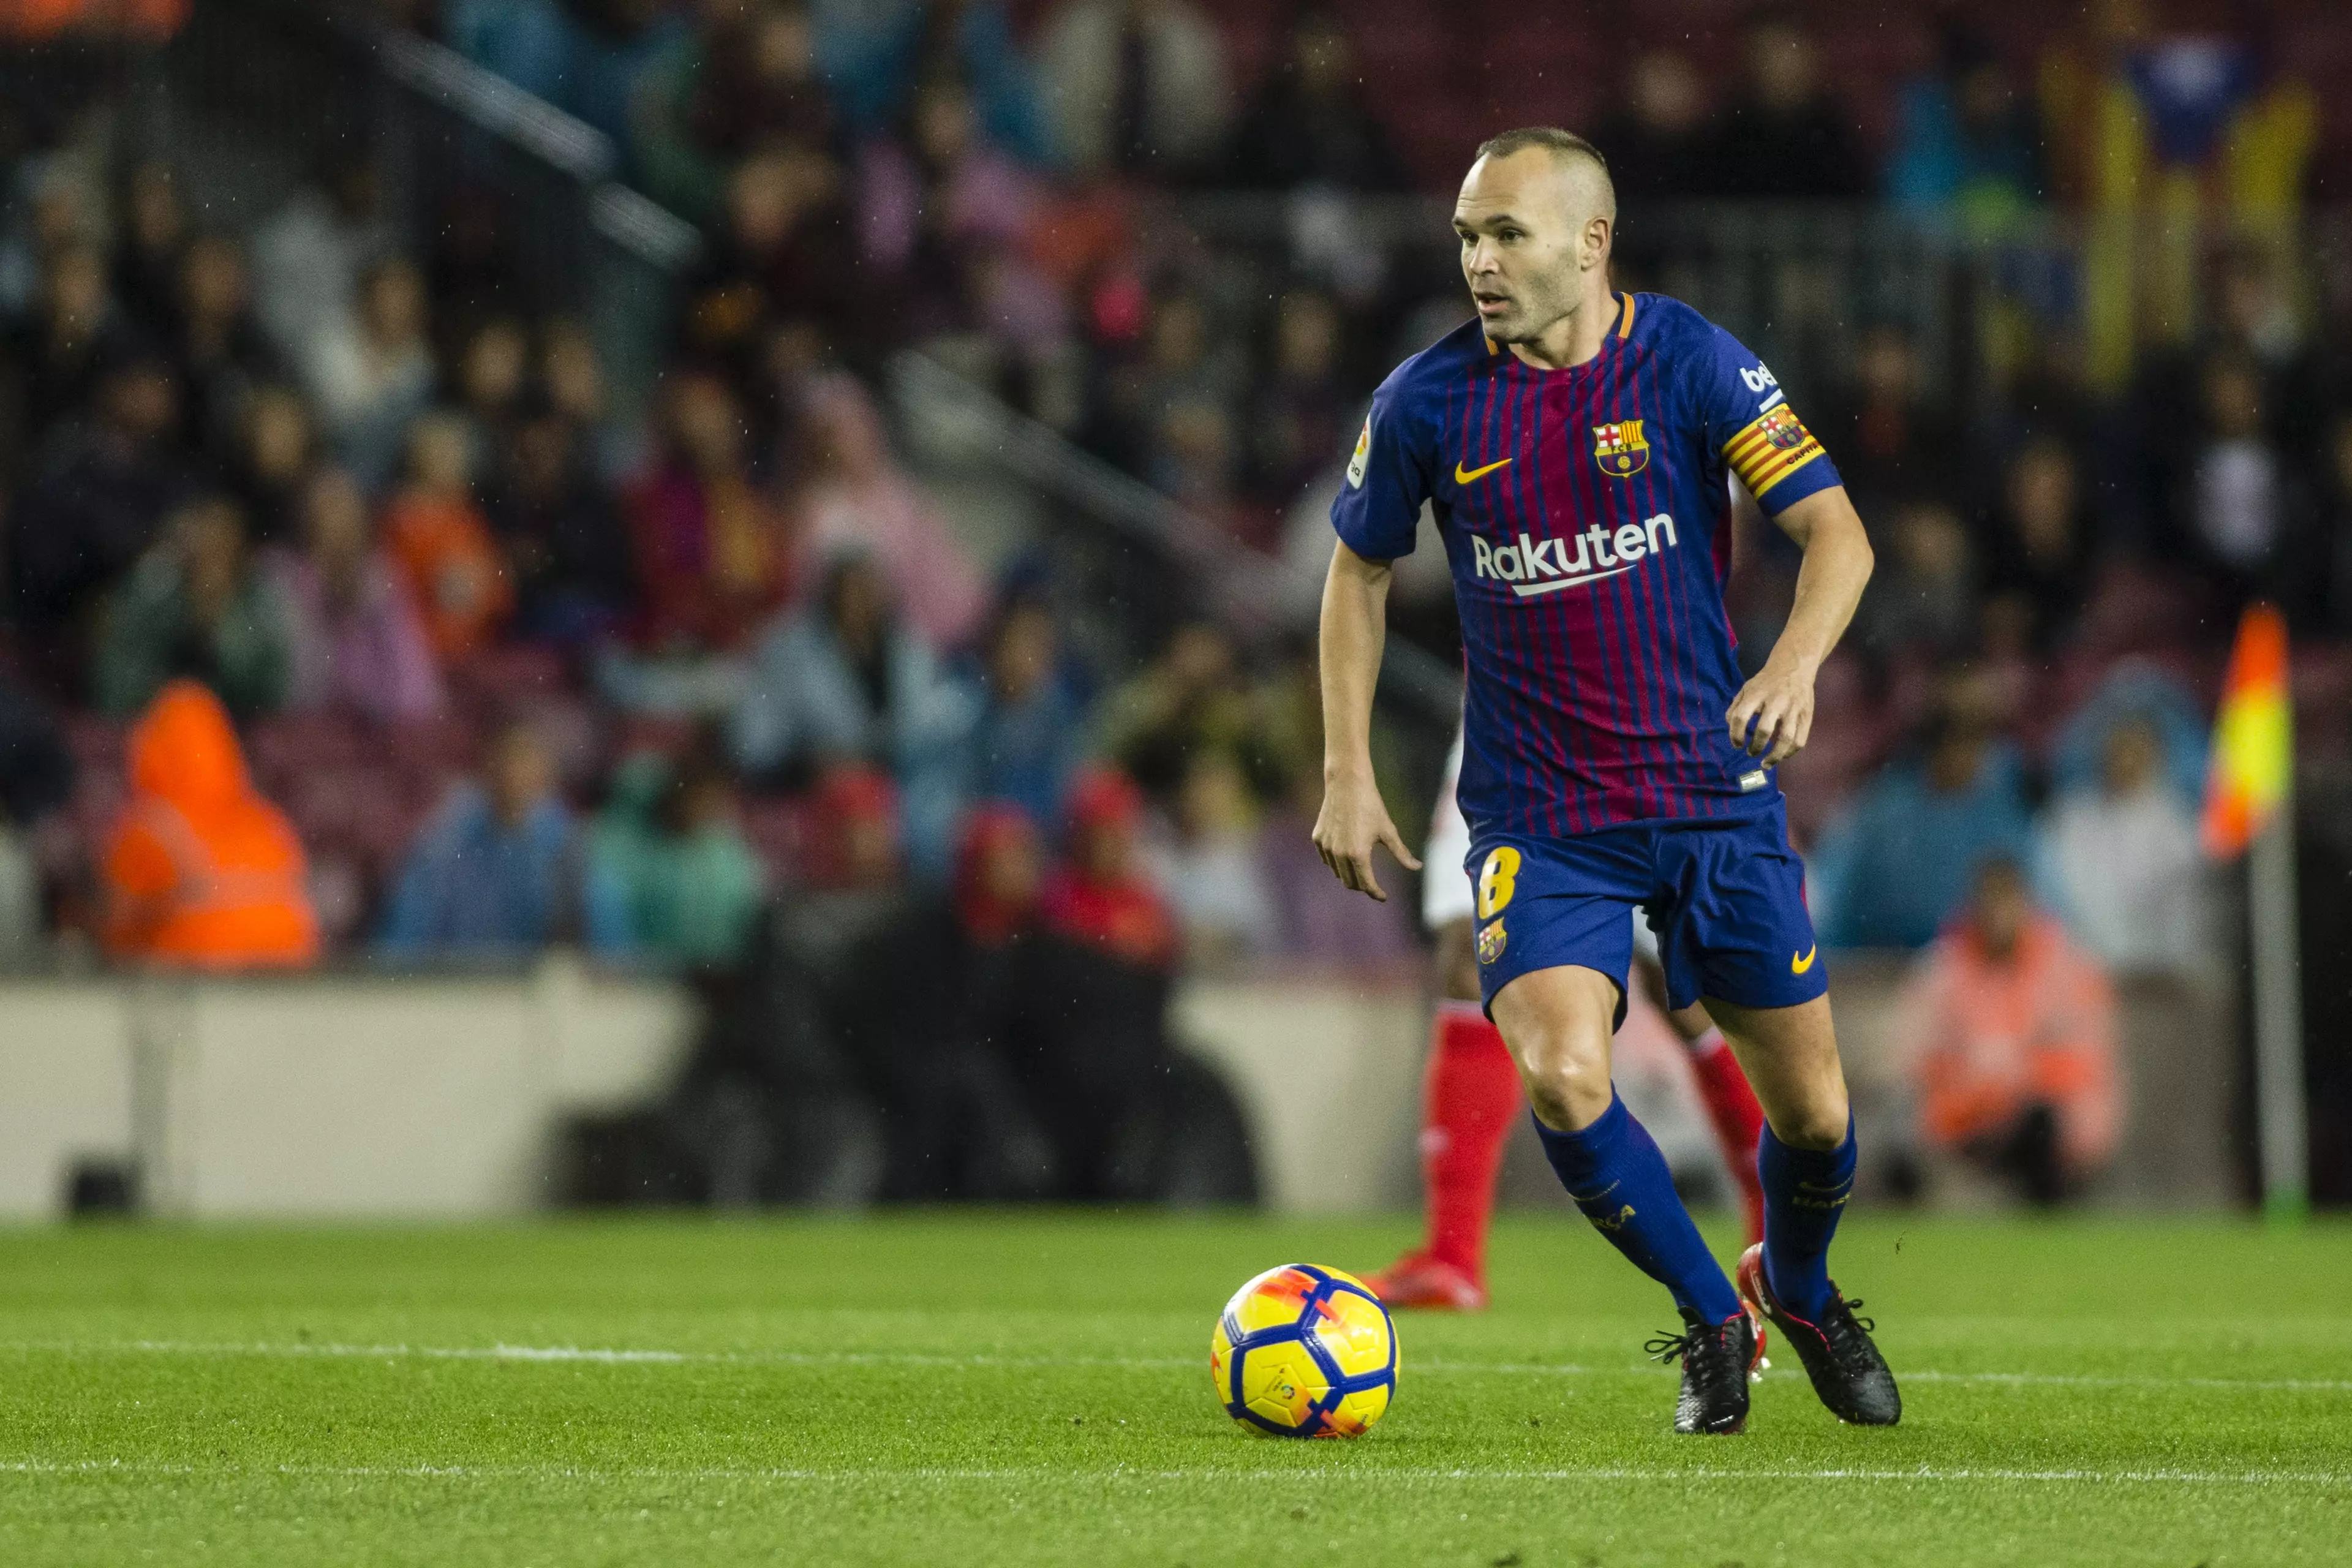 Andres Iniesta Has An Insane Offer On The Table To Leave Barcelona